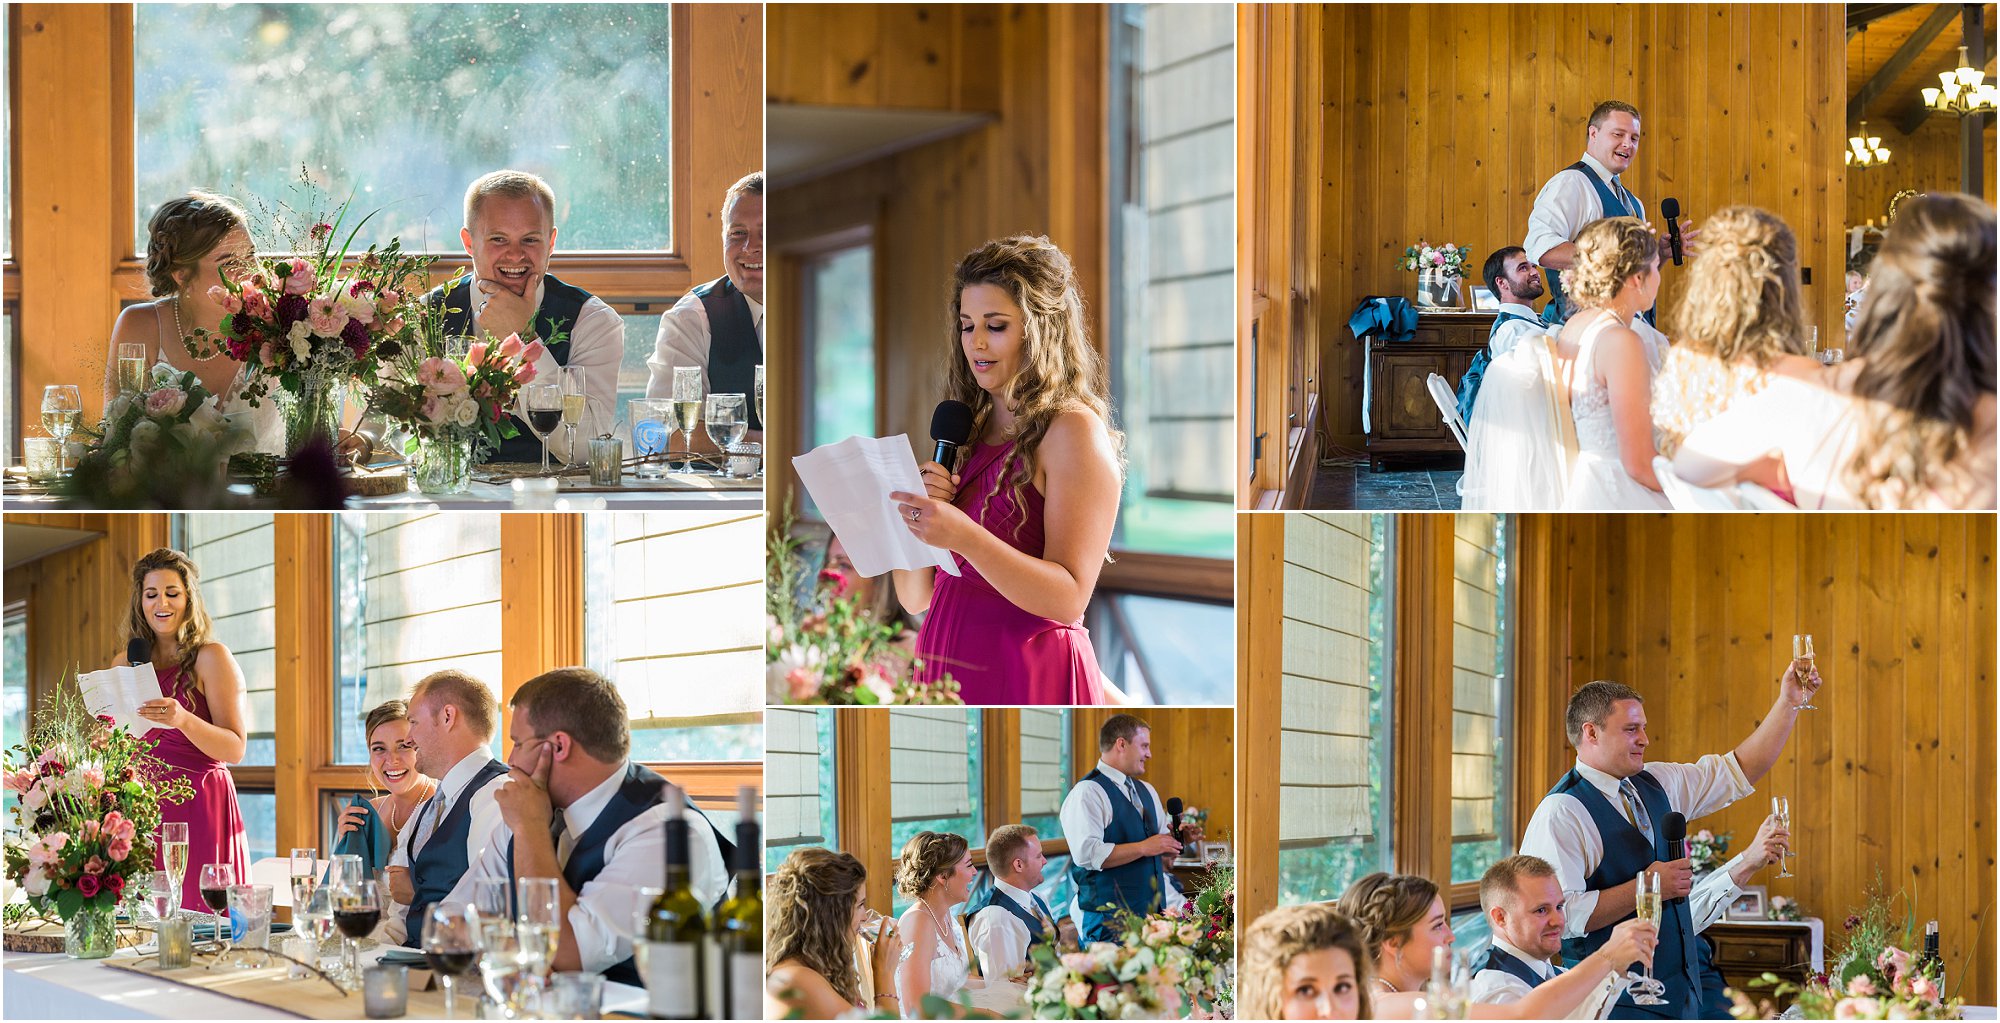 The maid of honor and best man give moving speeches during the reception at Rock Springs Ranch in Tumalo, OR. Photographed by Bend wedding photographer Erica Swantek Photography.